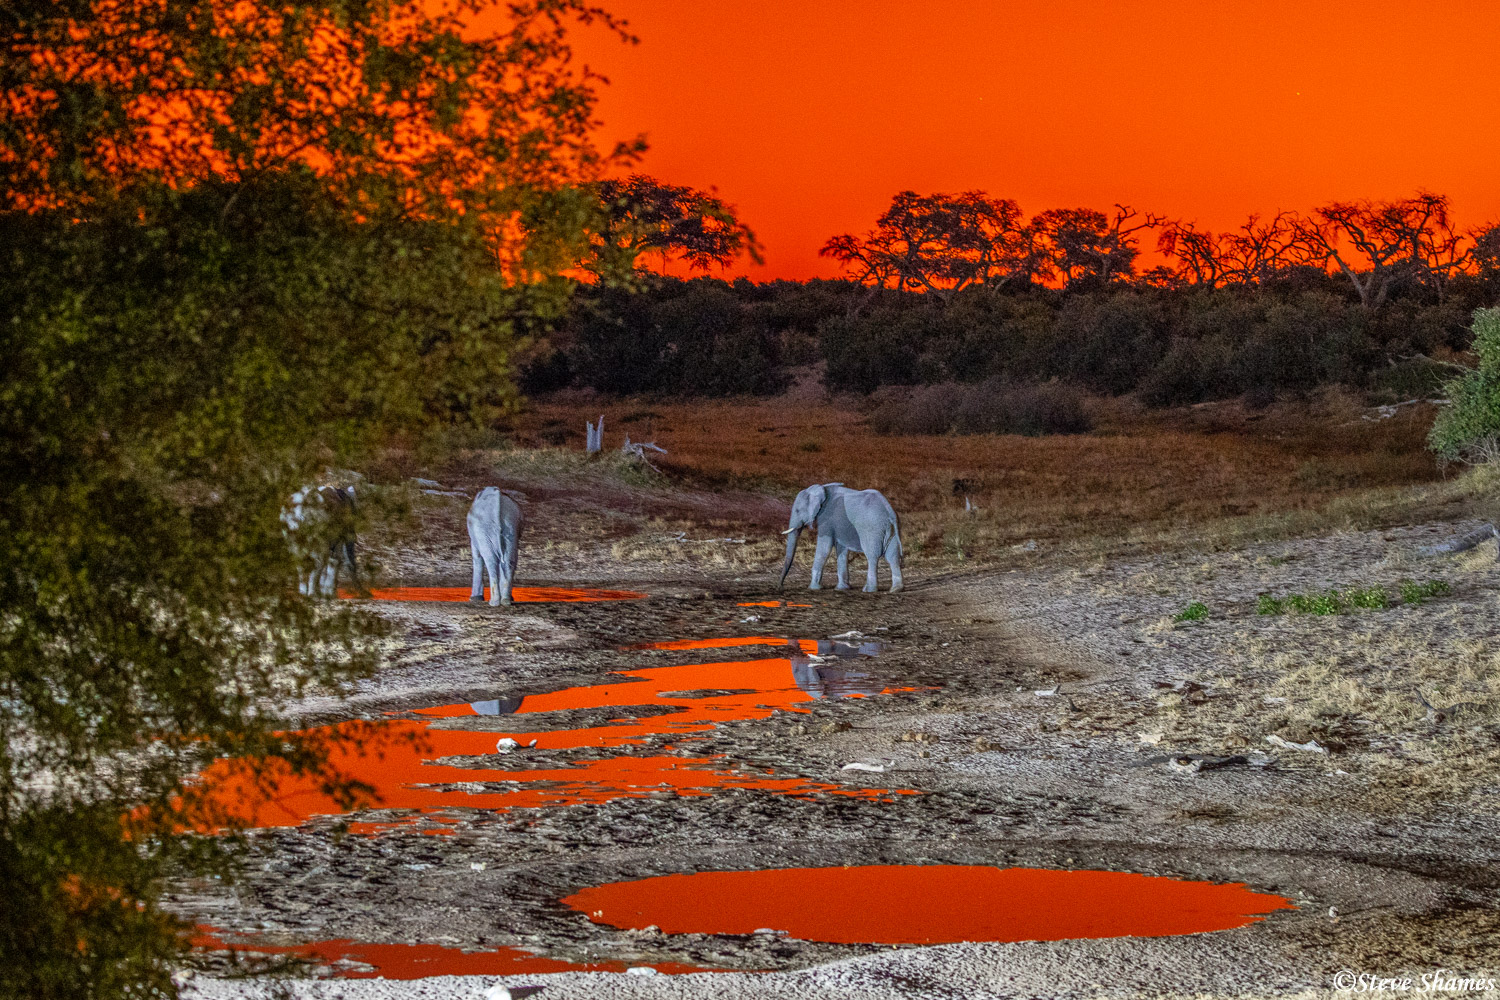 A fiery red sunset at Savuti Safari Lodge. The red sky was reflecting in the waterholes.